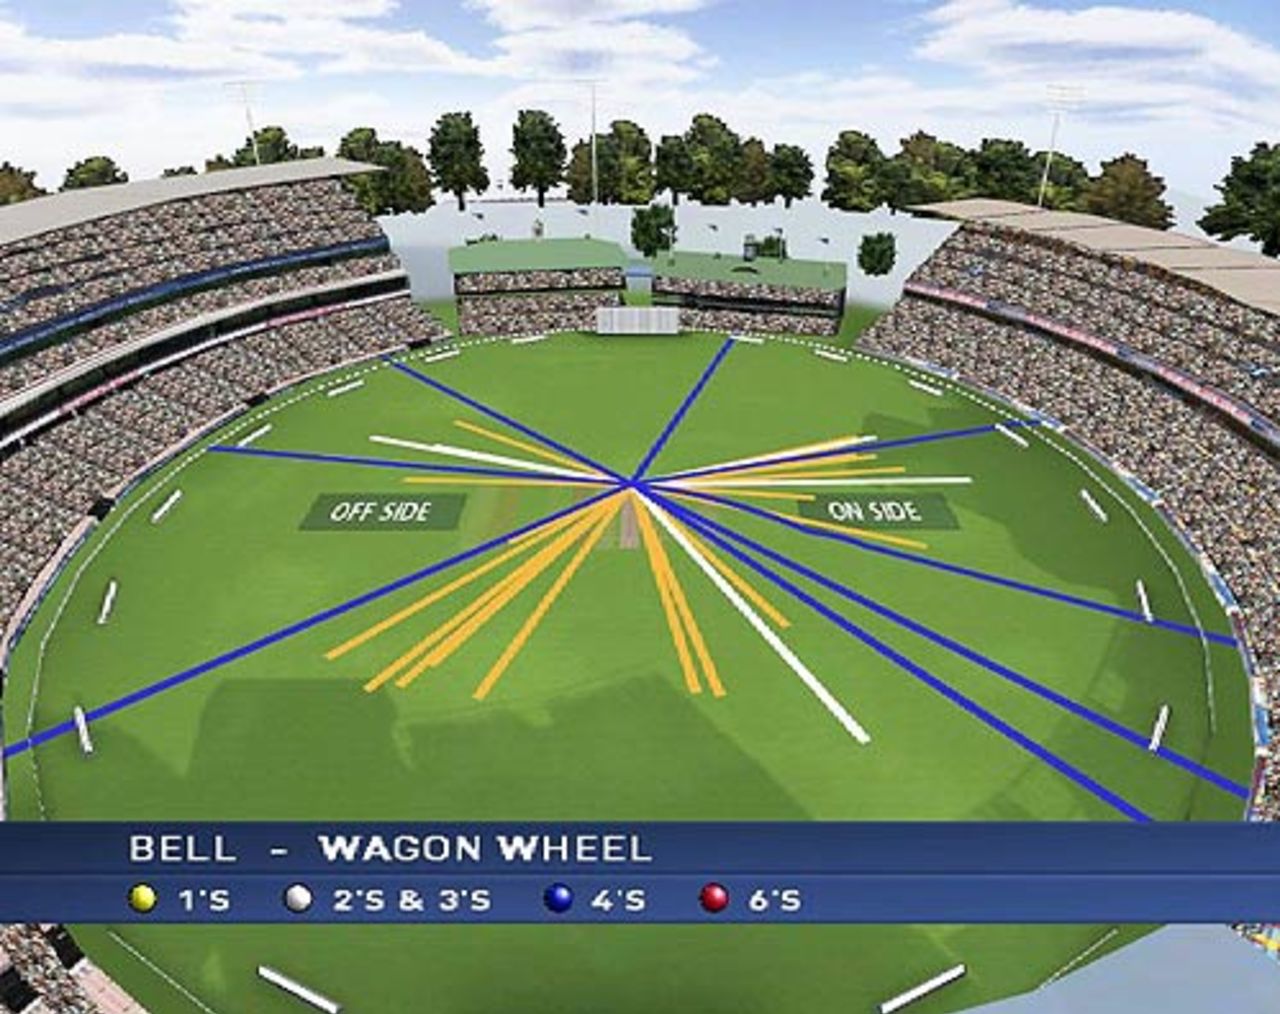 The wagon wheel depicting Ian Bell's scoring areas during his innings of 71, Australia v England, 5th Test, Sydney, 1st day, January 2, 2007